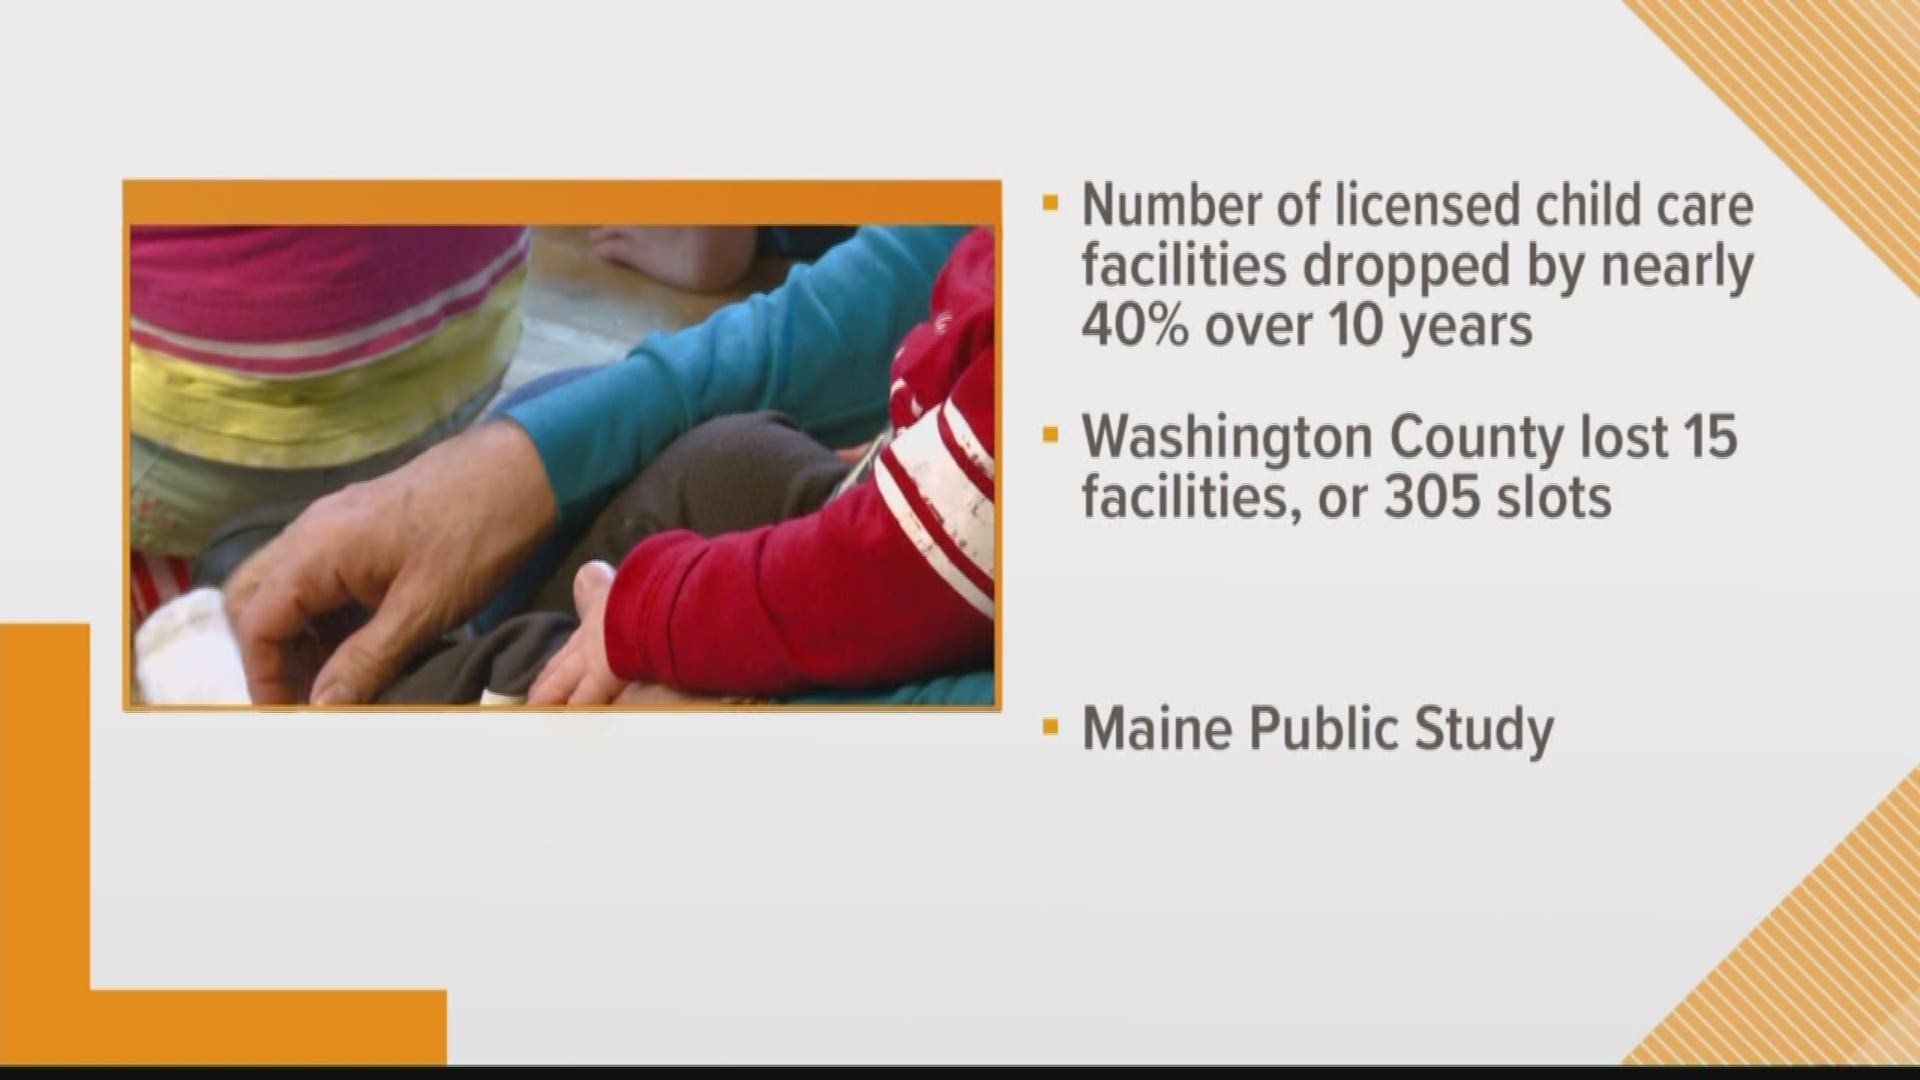 Maine Public reports the state's number of licensed child cares has dropped by nearly 40% over the last ten years.